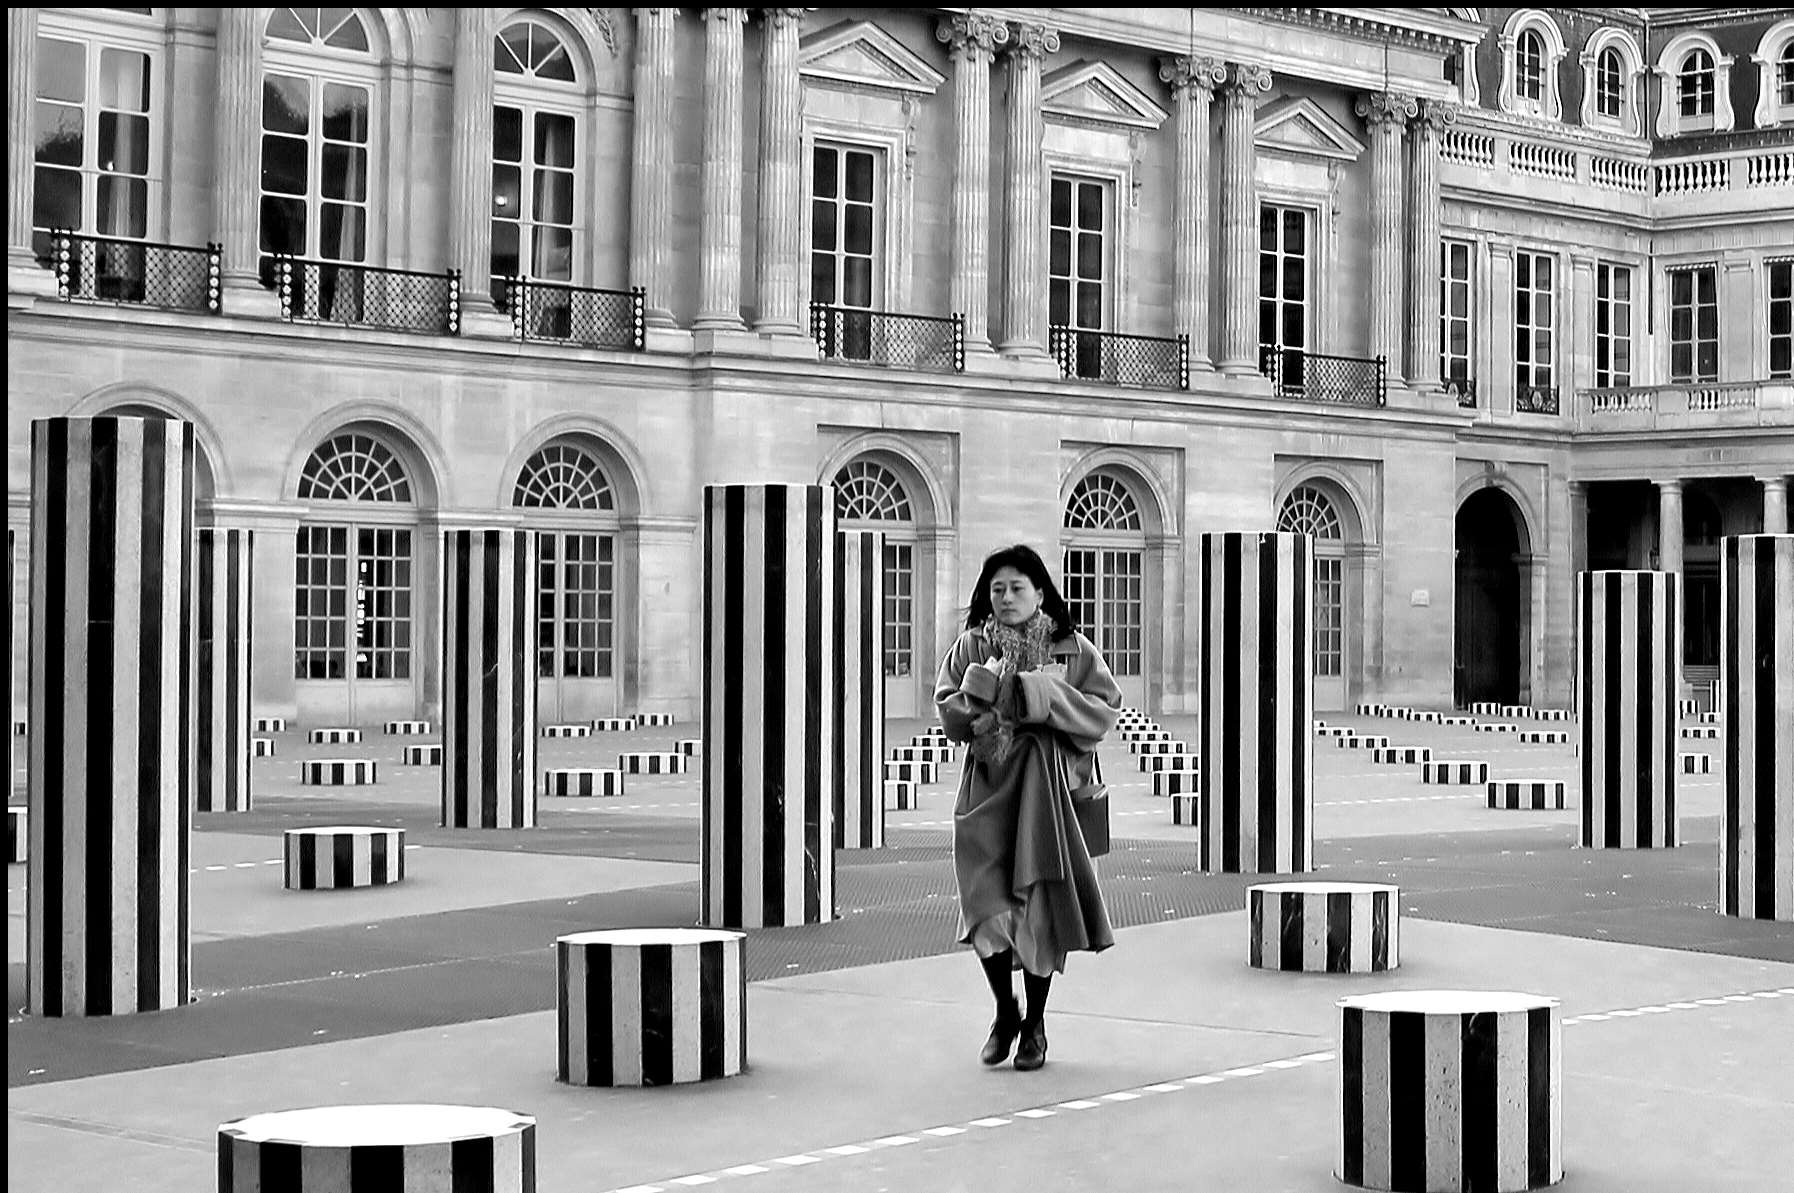 The Royal Palais in Paris by Julie Foreman